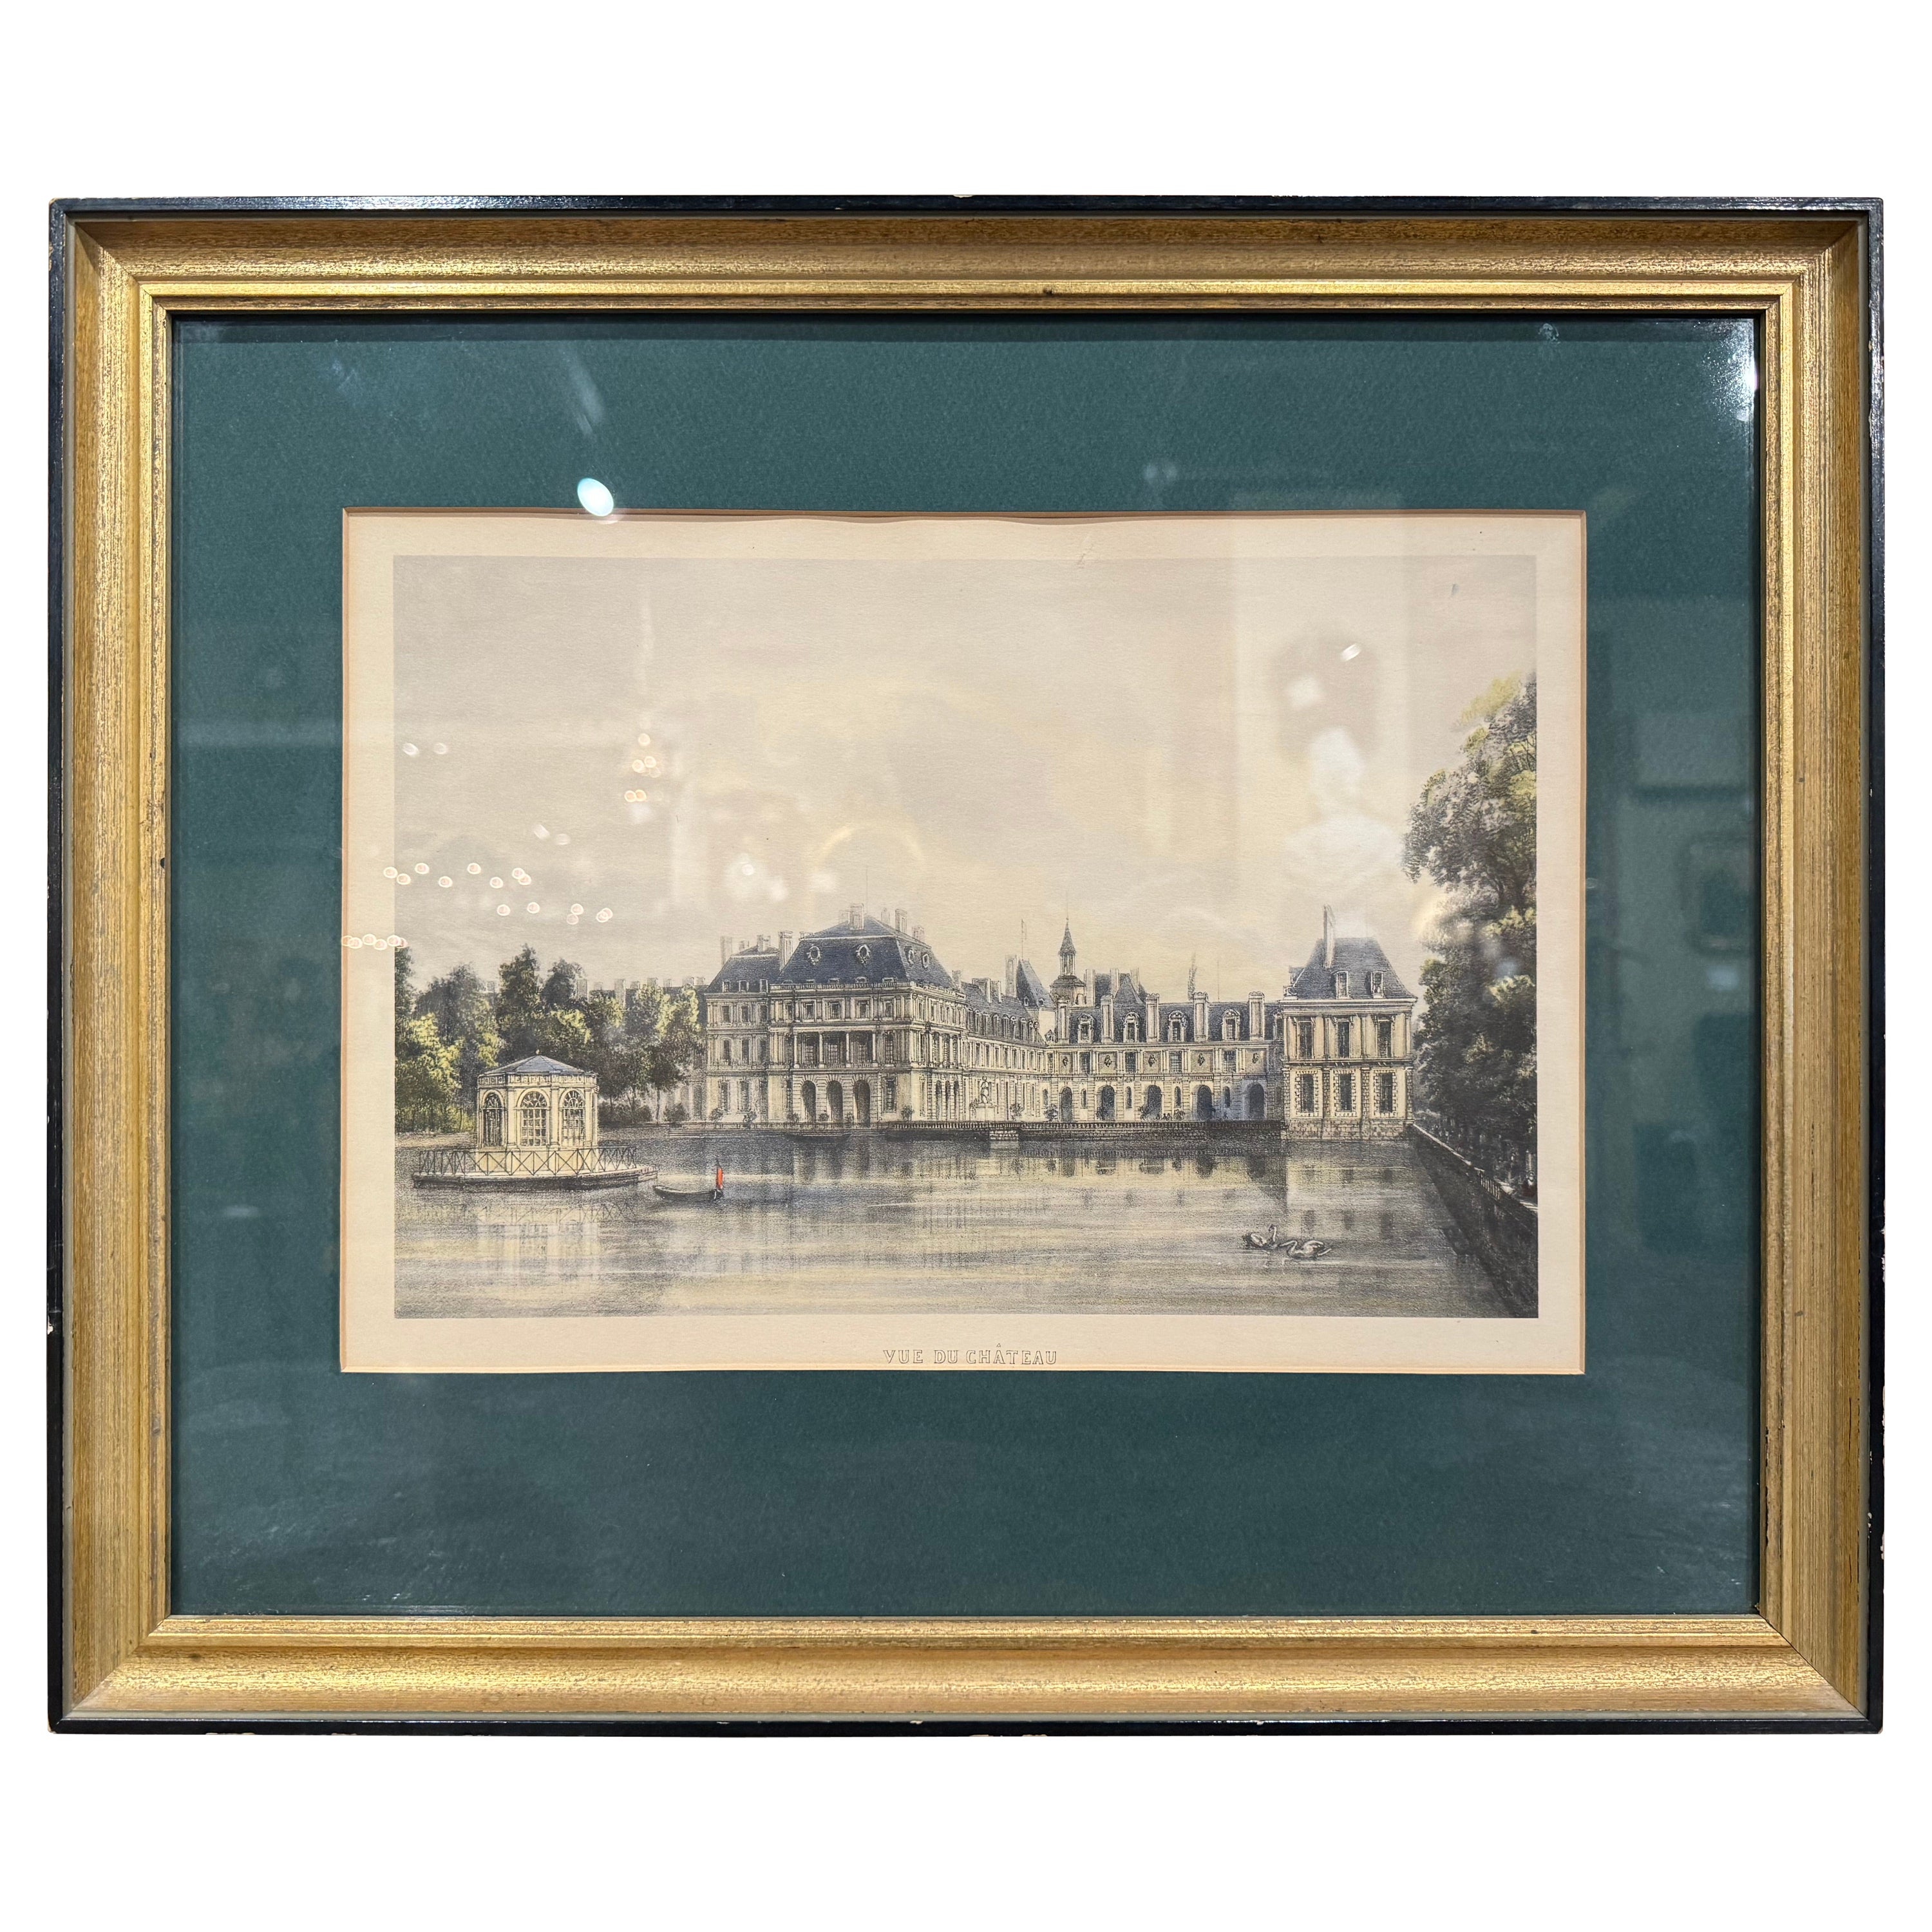  19th Century French Colored Print of "Chateau de Fontainebleau" in Gilt Frame